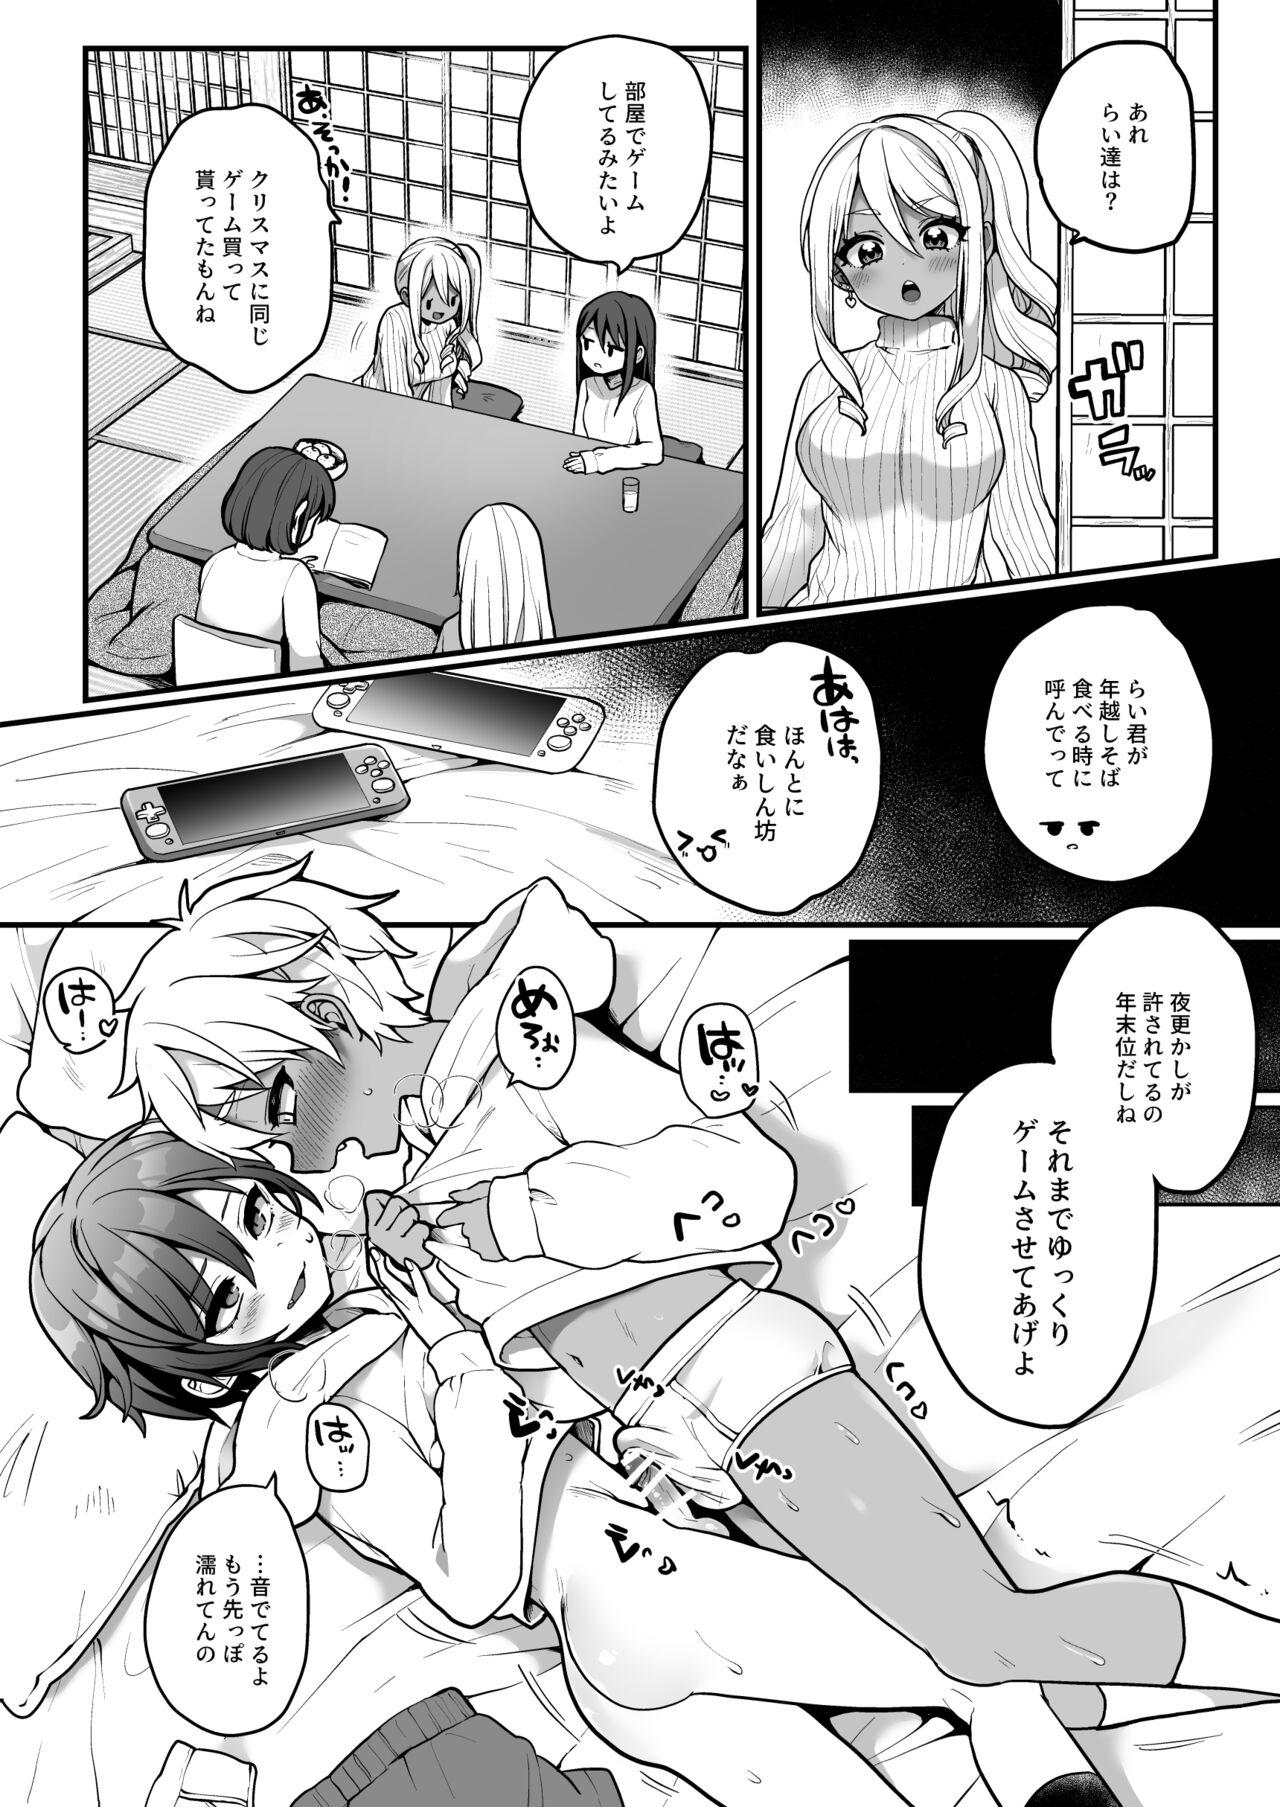 Red Head 今年もありがとうございました! - Original Mature Woman - Page 2